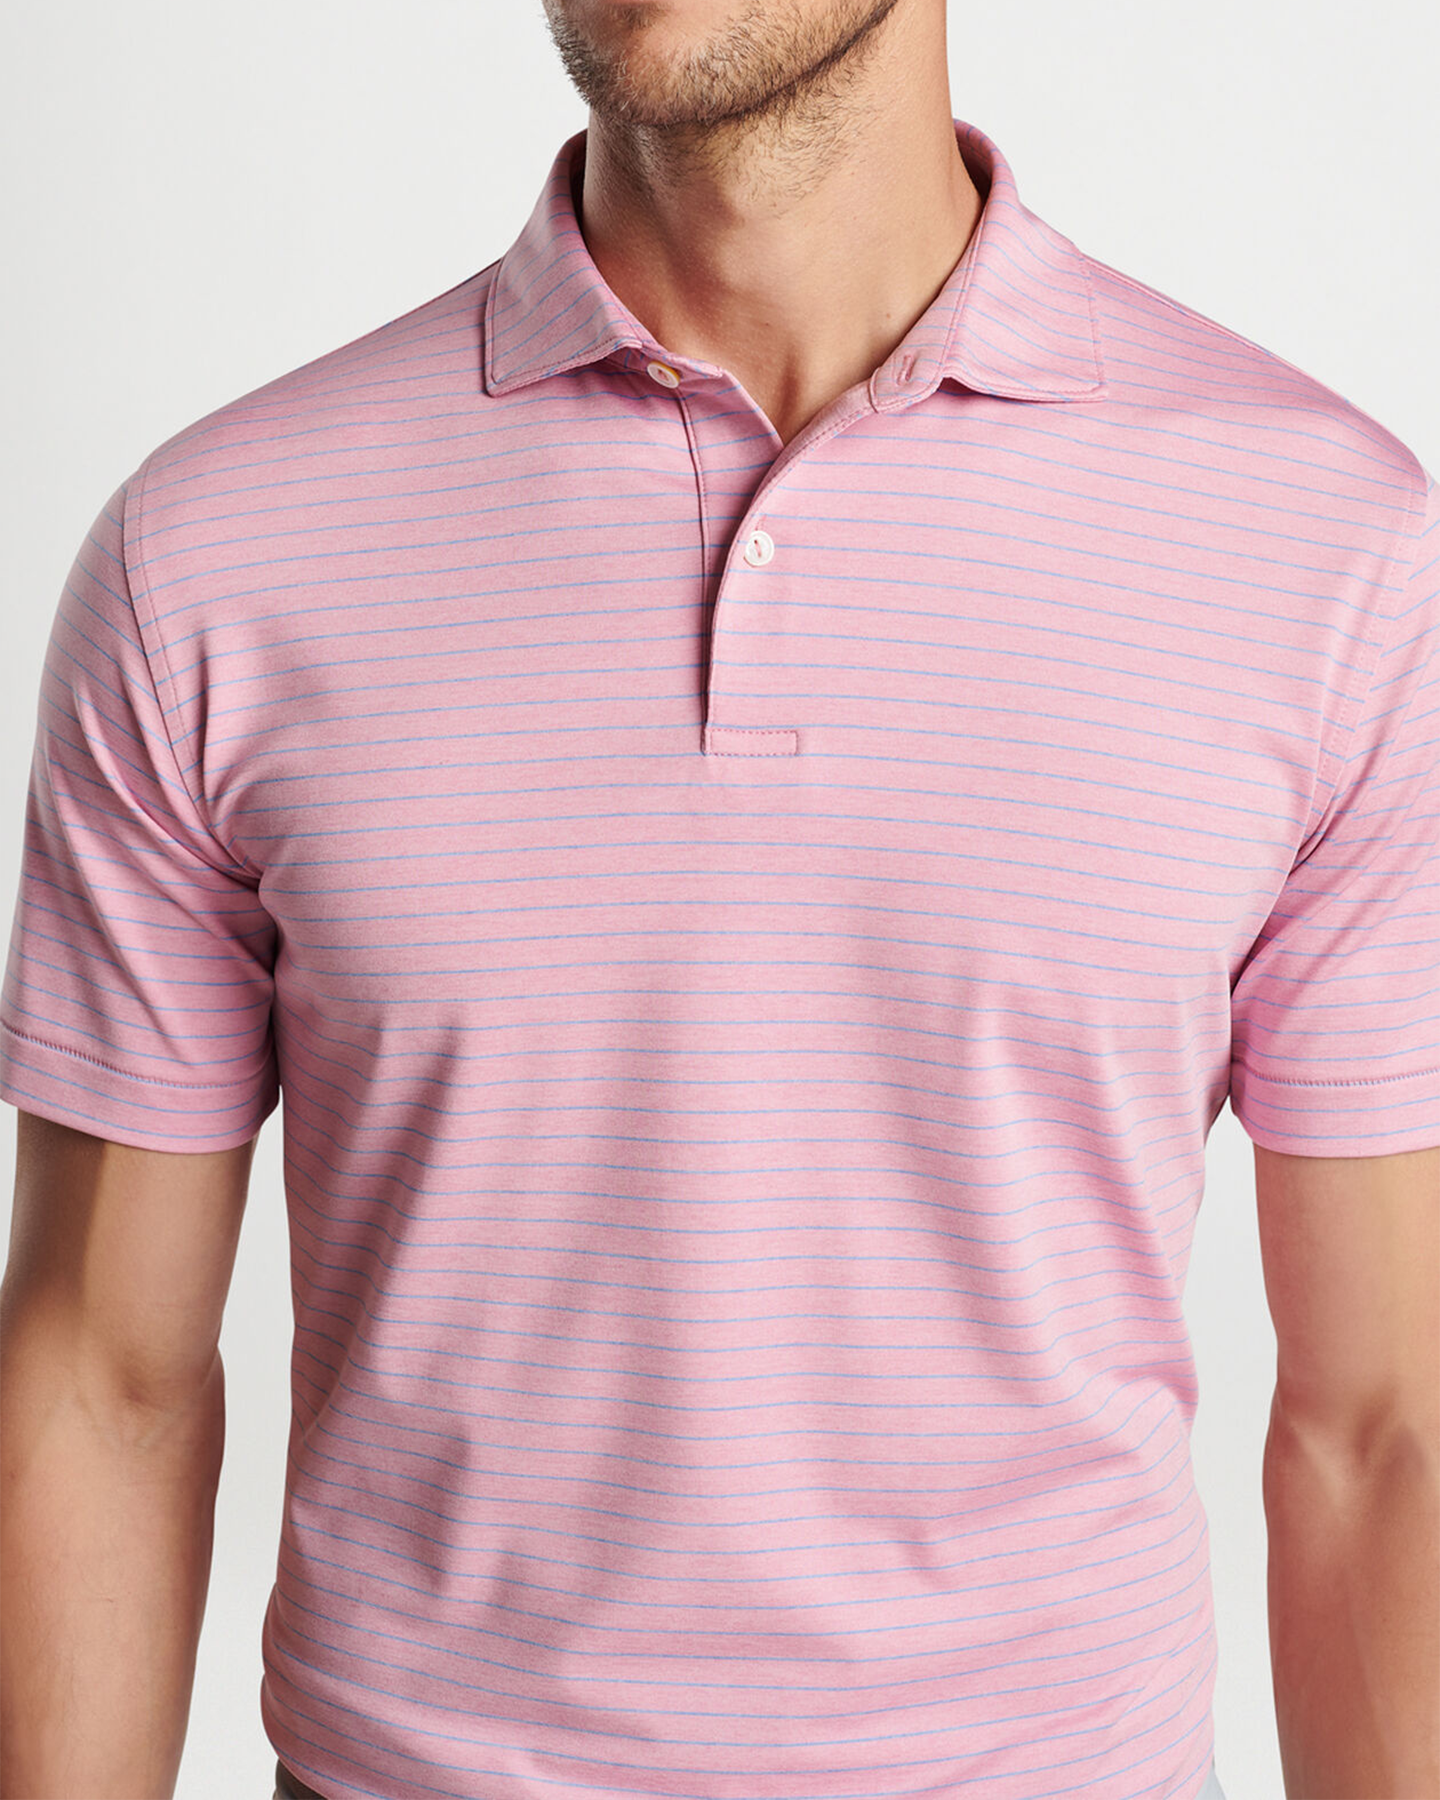 DUET PERFORMANCE JERSEY POLO - SPRING BLOSSOM